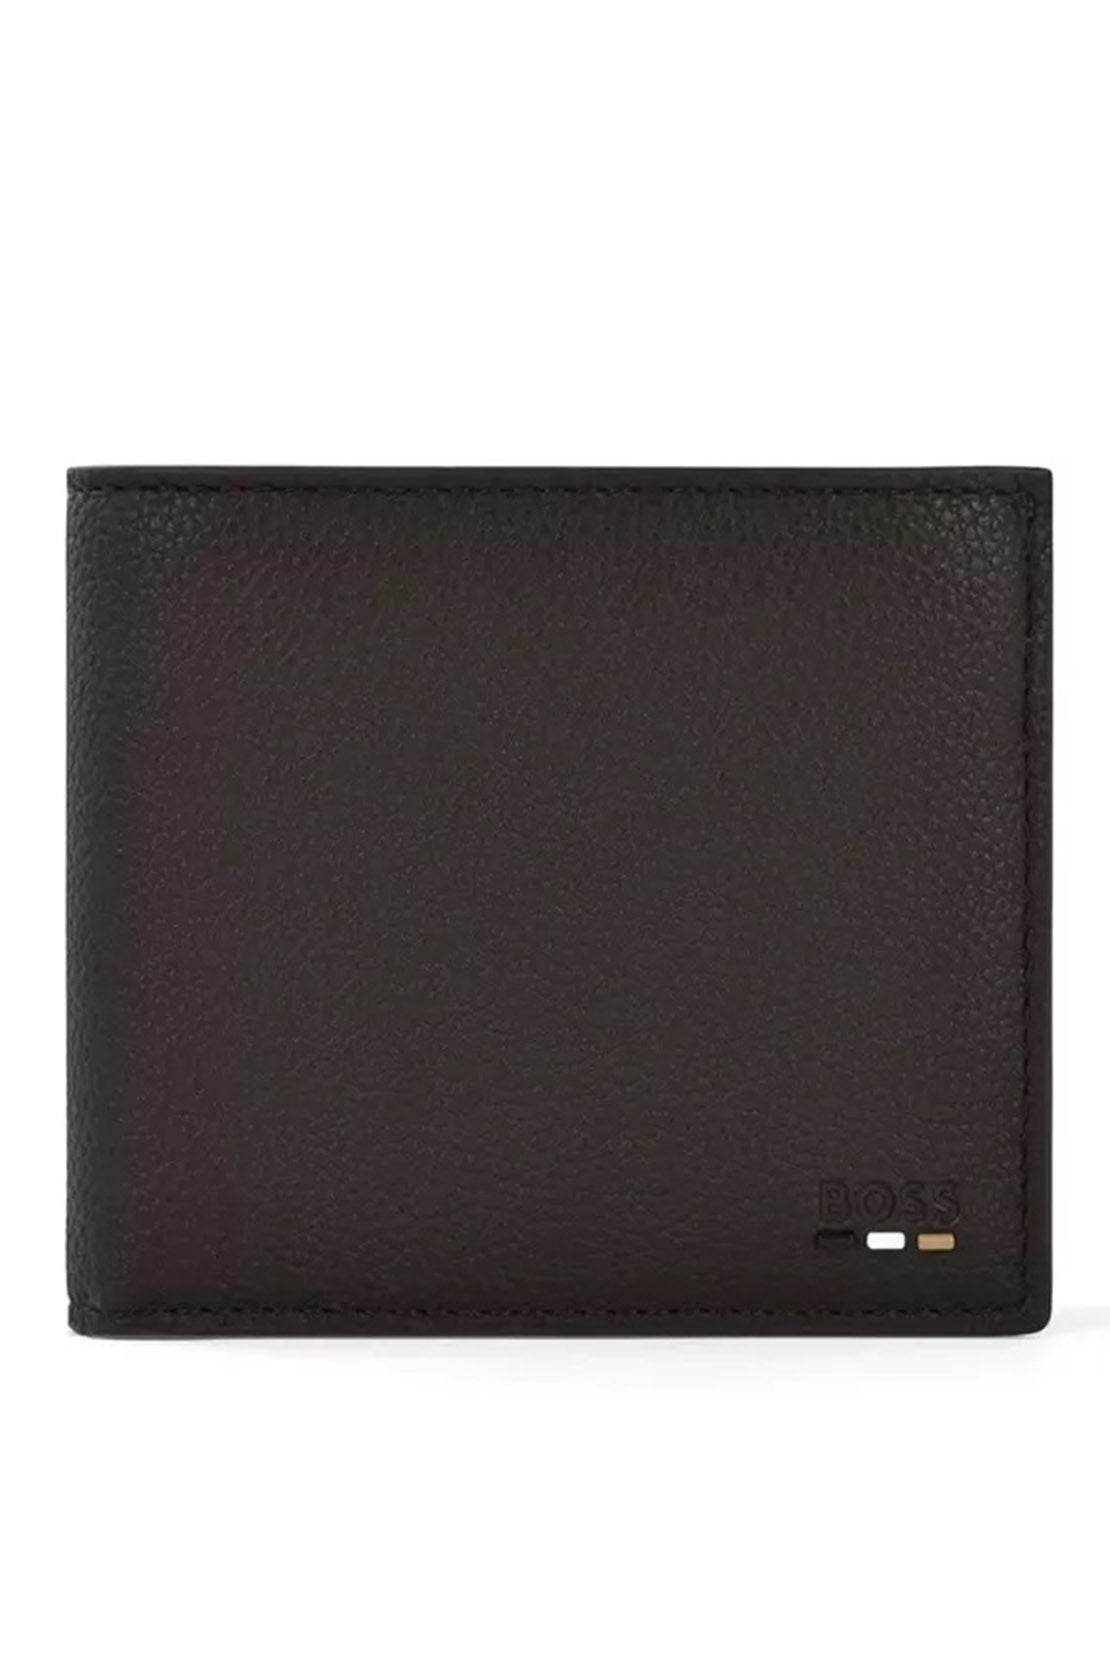 BOSS - RAY_4 CC Dark Brown Billfold Wallet With Coin Holder 50491962 201